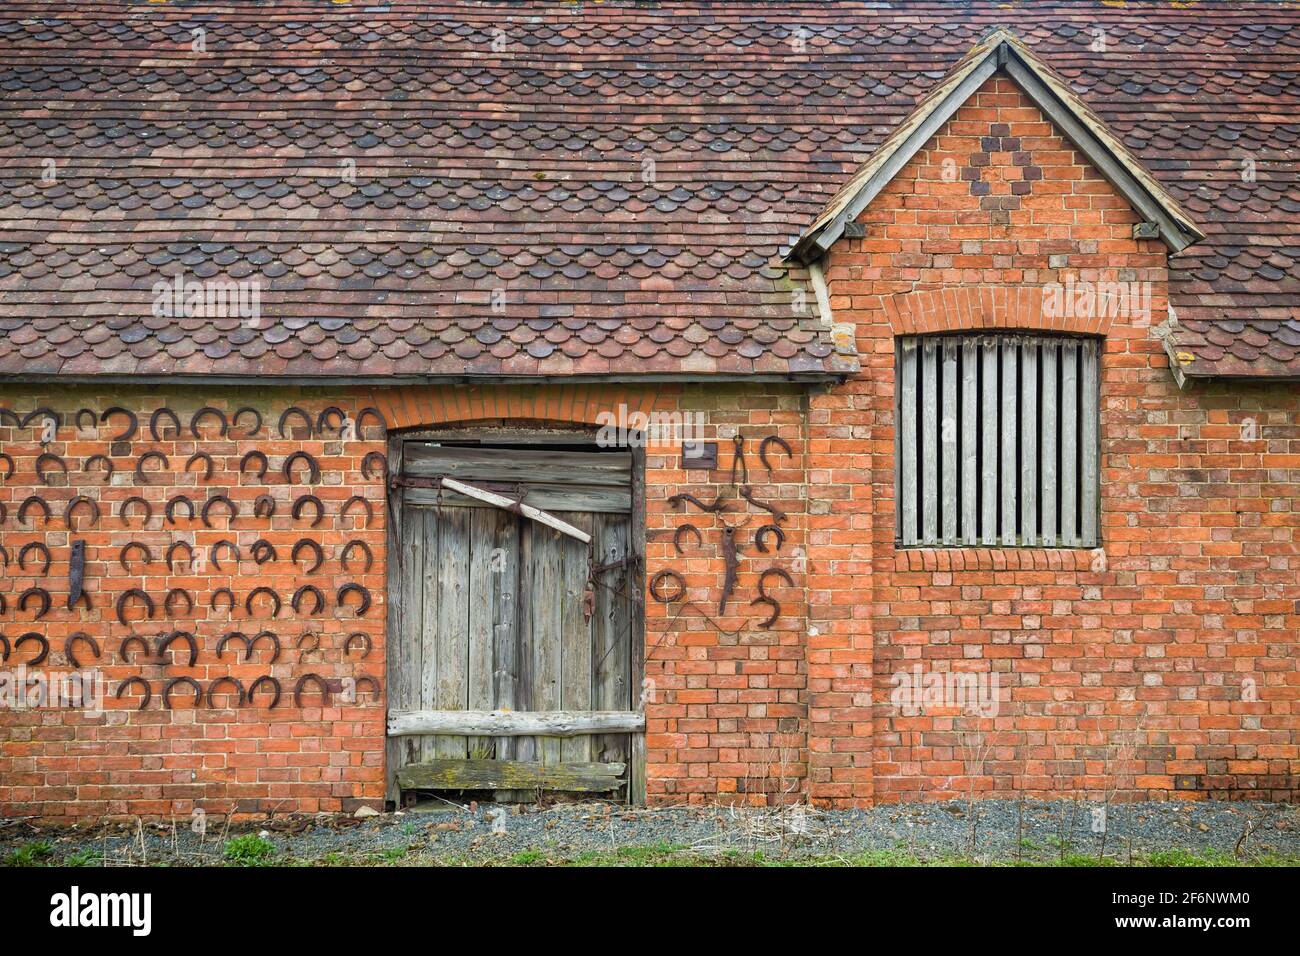 BUCKINGHAM, UK - April 05, 2015. Old brick farm building or outbuilding with wooden barn door wall decorated with horseshoes, UK Stock Photo